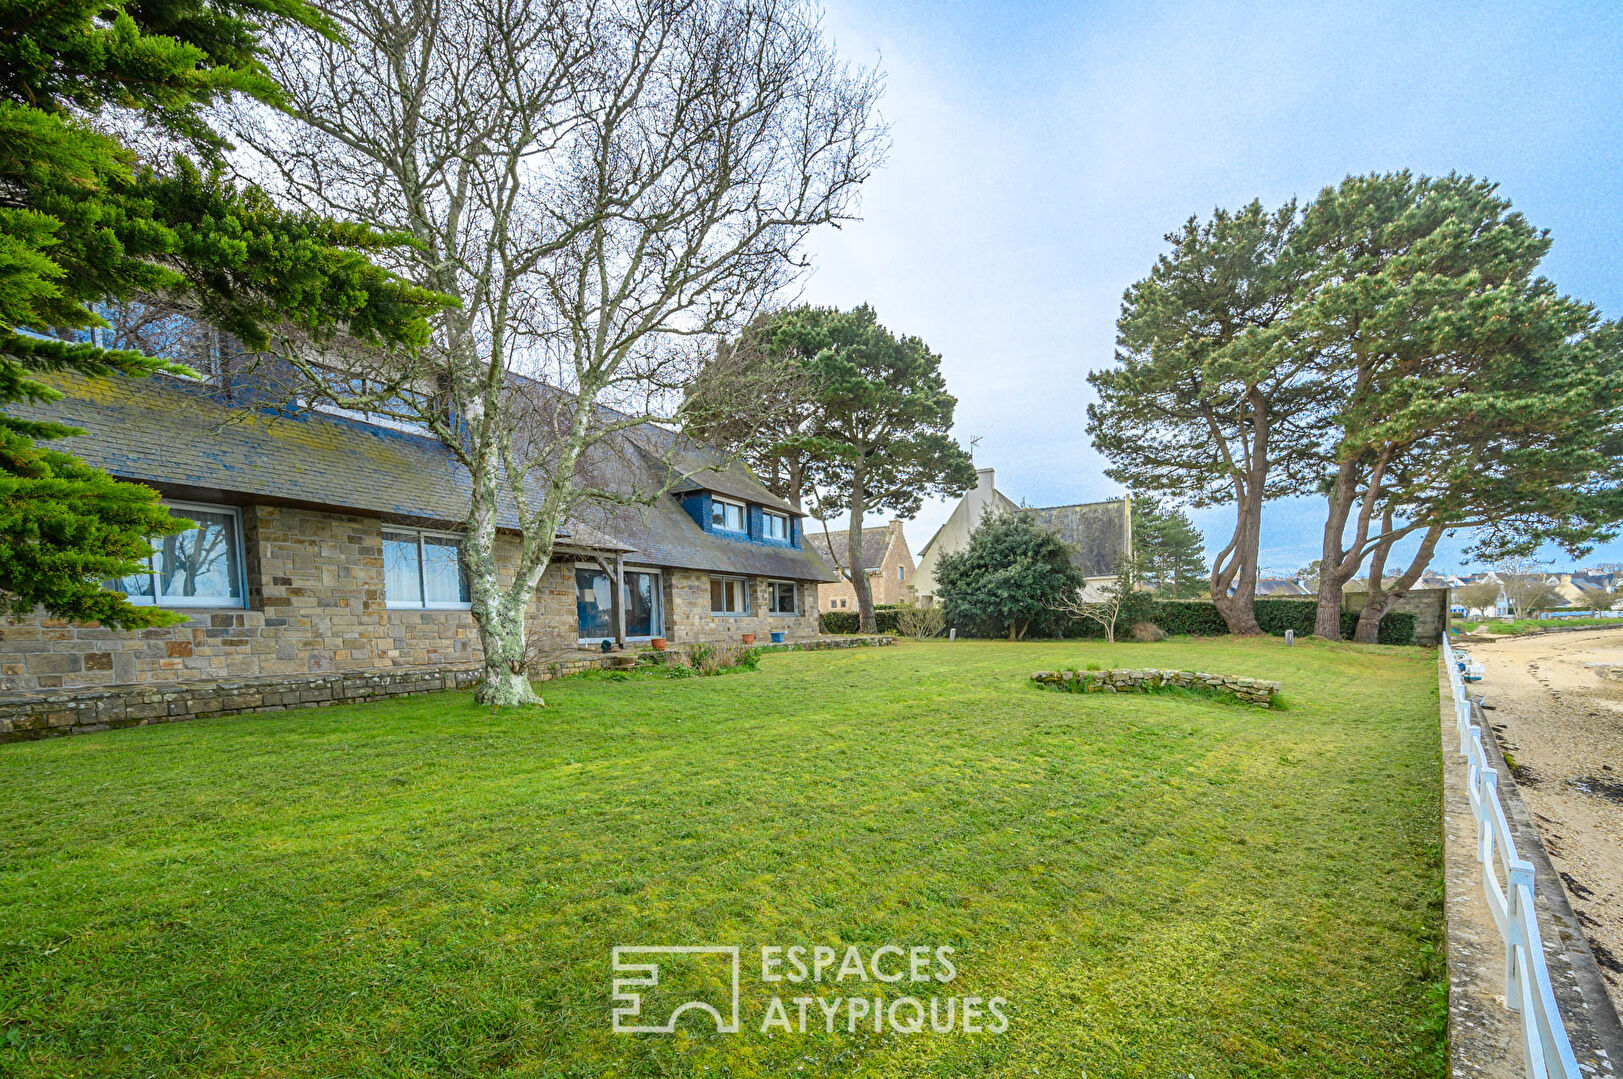 Prestigious family property with stunning views of the Rade of Lorient